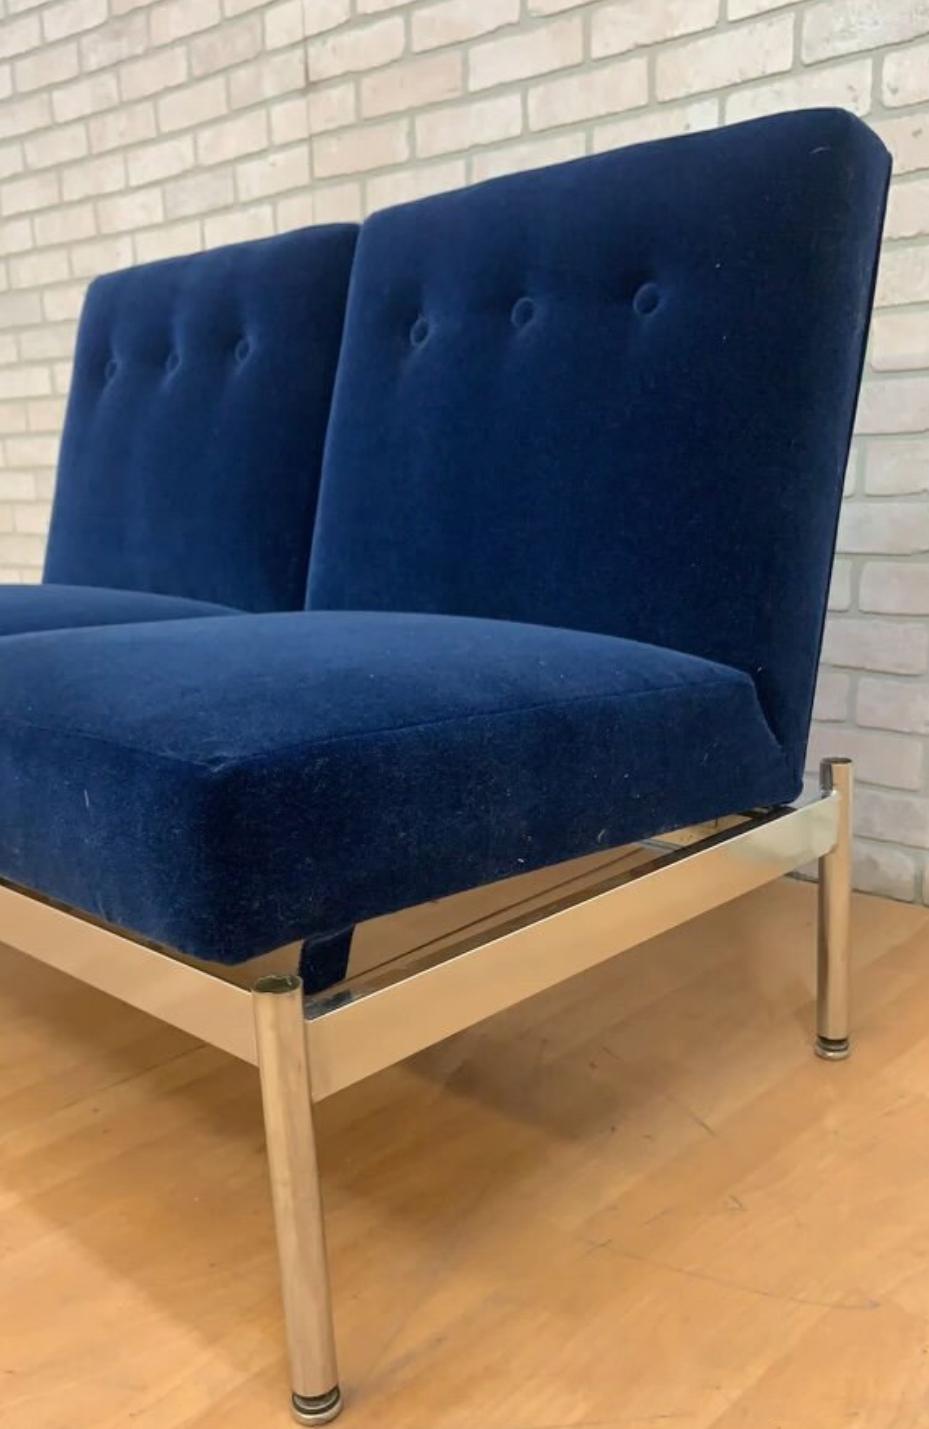 MCM Steelcase 3 Seat & 2 Seat Sofa Set Upholstered in “Cobalt Blue” - Set of 2 In Good Condition For Sale In Chicago, IL